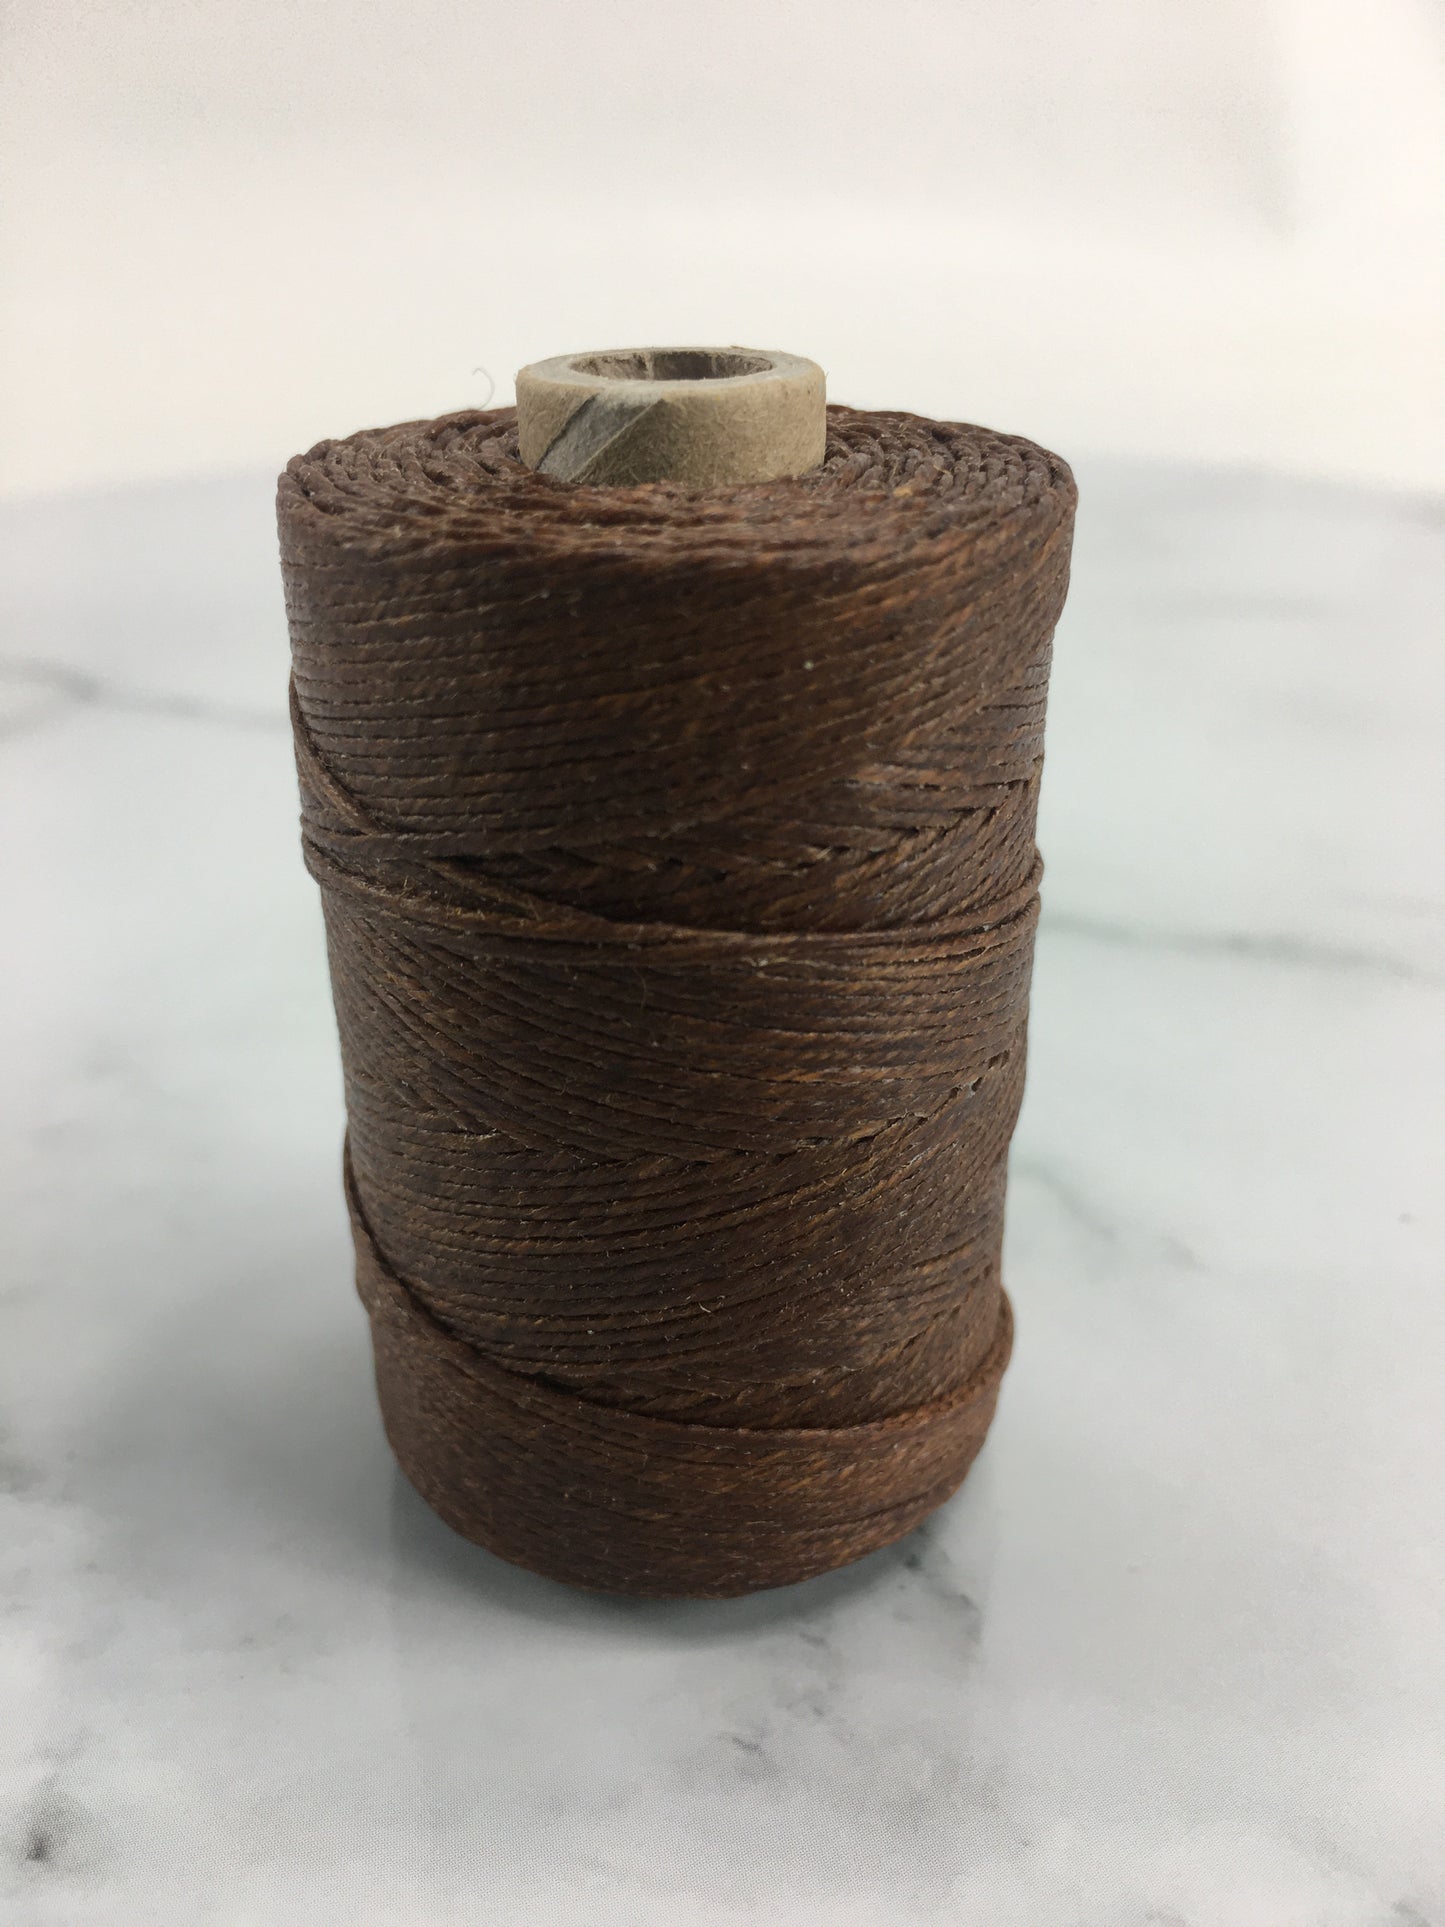 Camel Brown- Per spool 50g- 100% Pure Linen Thread- Waxed- 18/4 No.18 Cord 4- Approx 1mm thick